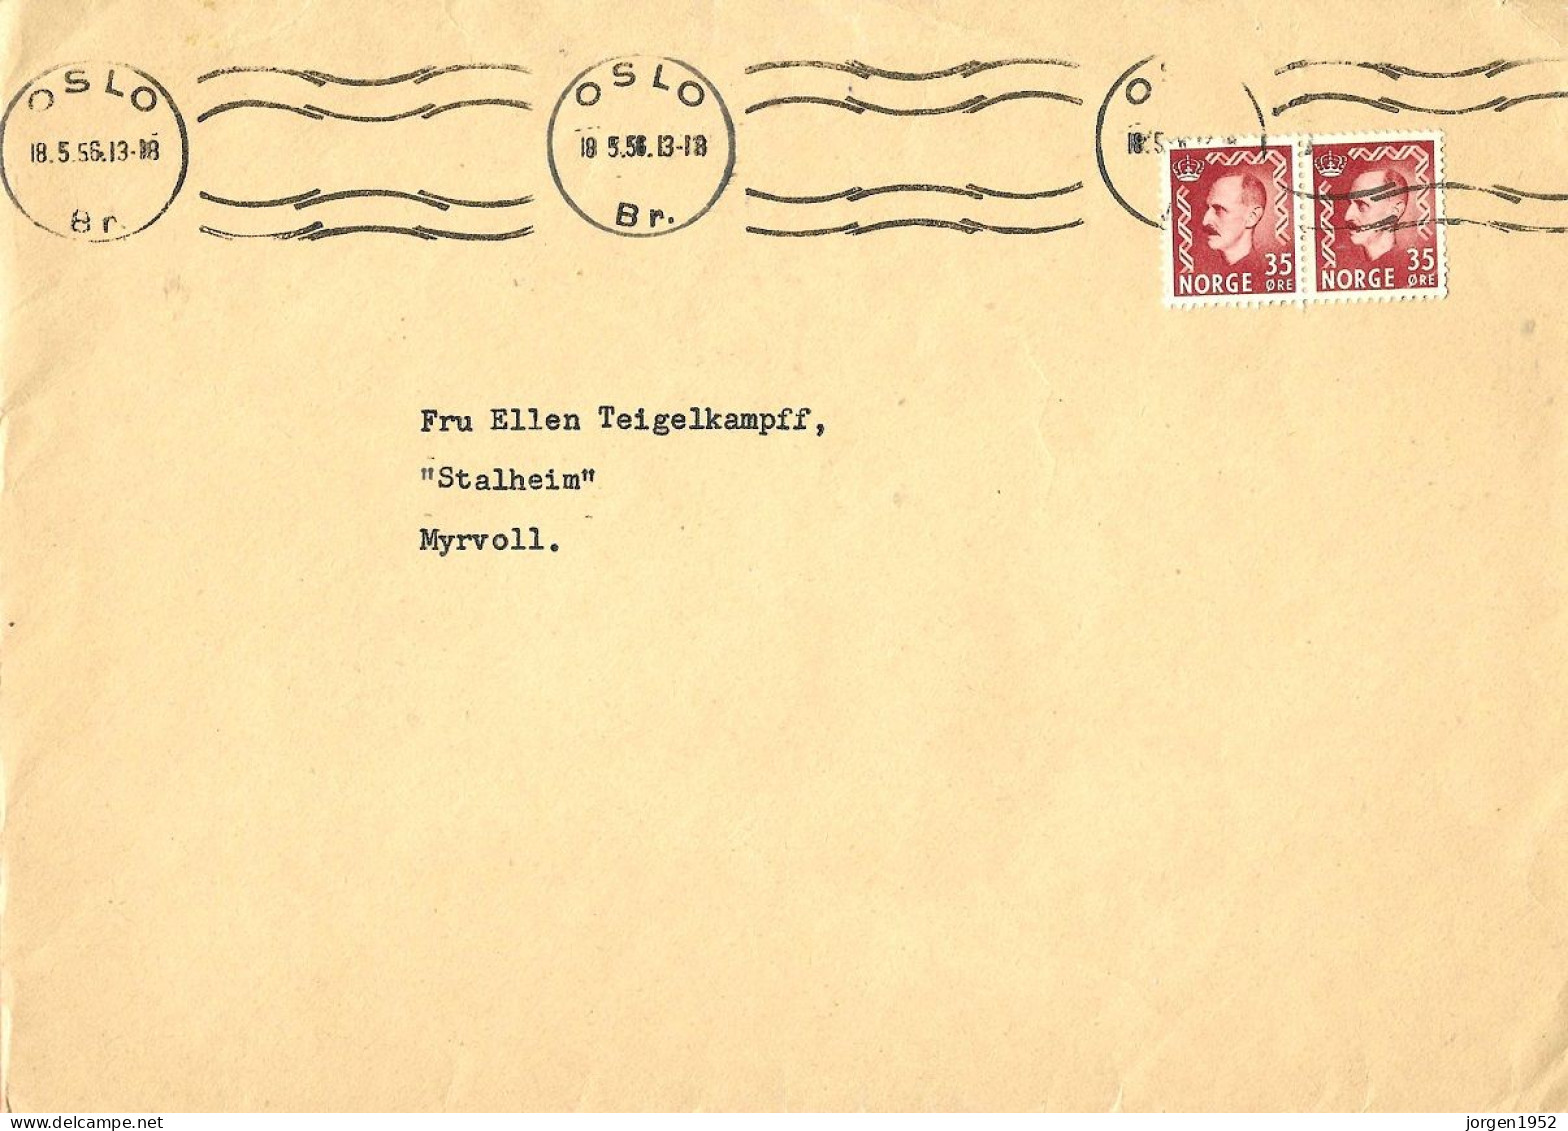 NORWAY # FROM 1950-51 - Postal Stationery